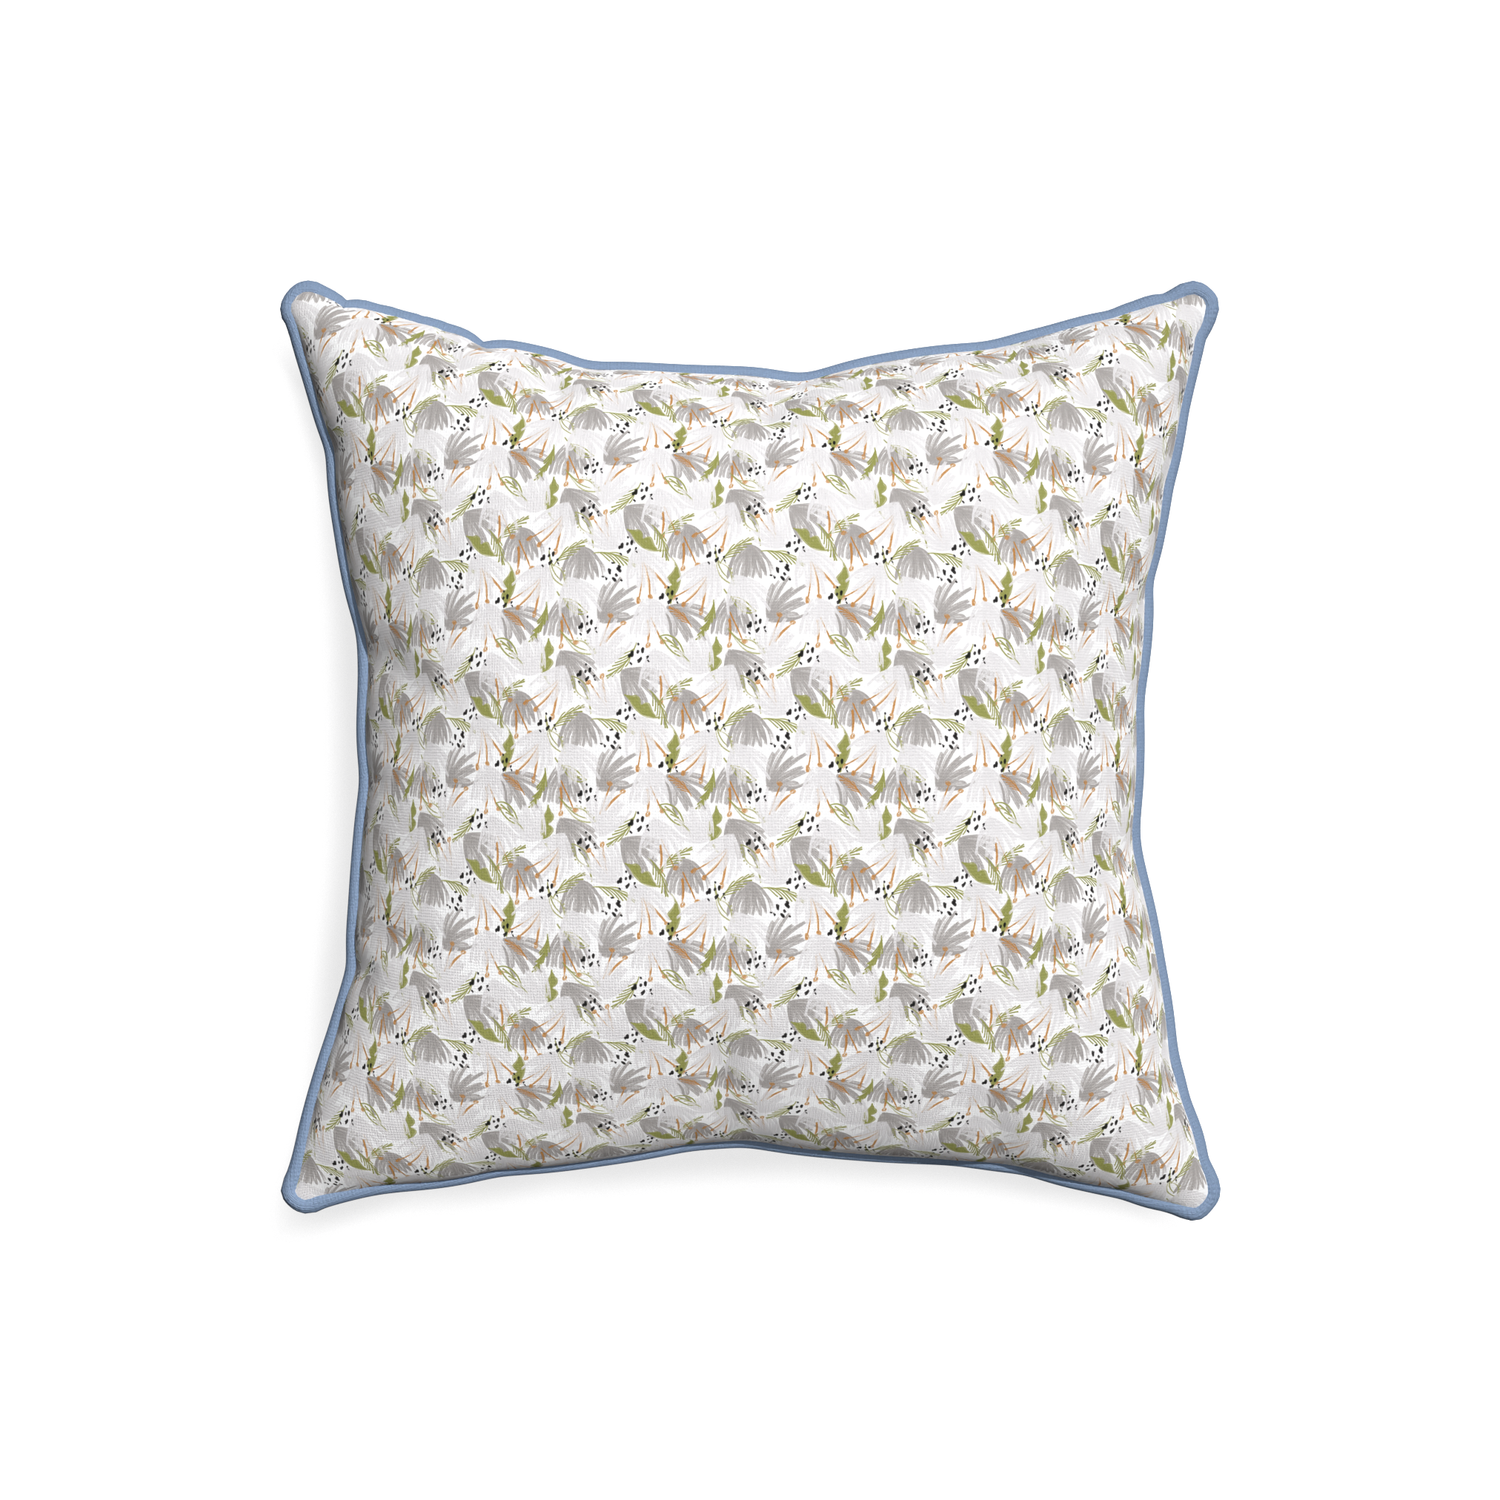 20-square eden grey custom grey floralpillow with sky piping on white background